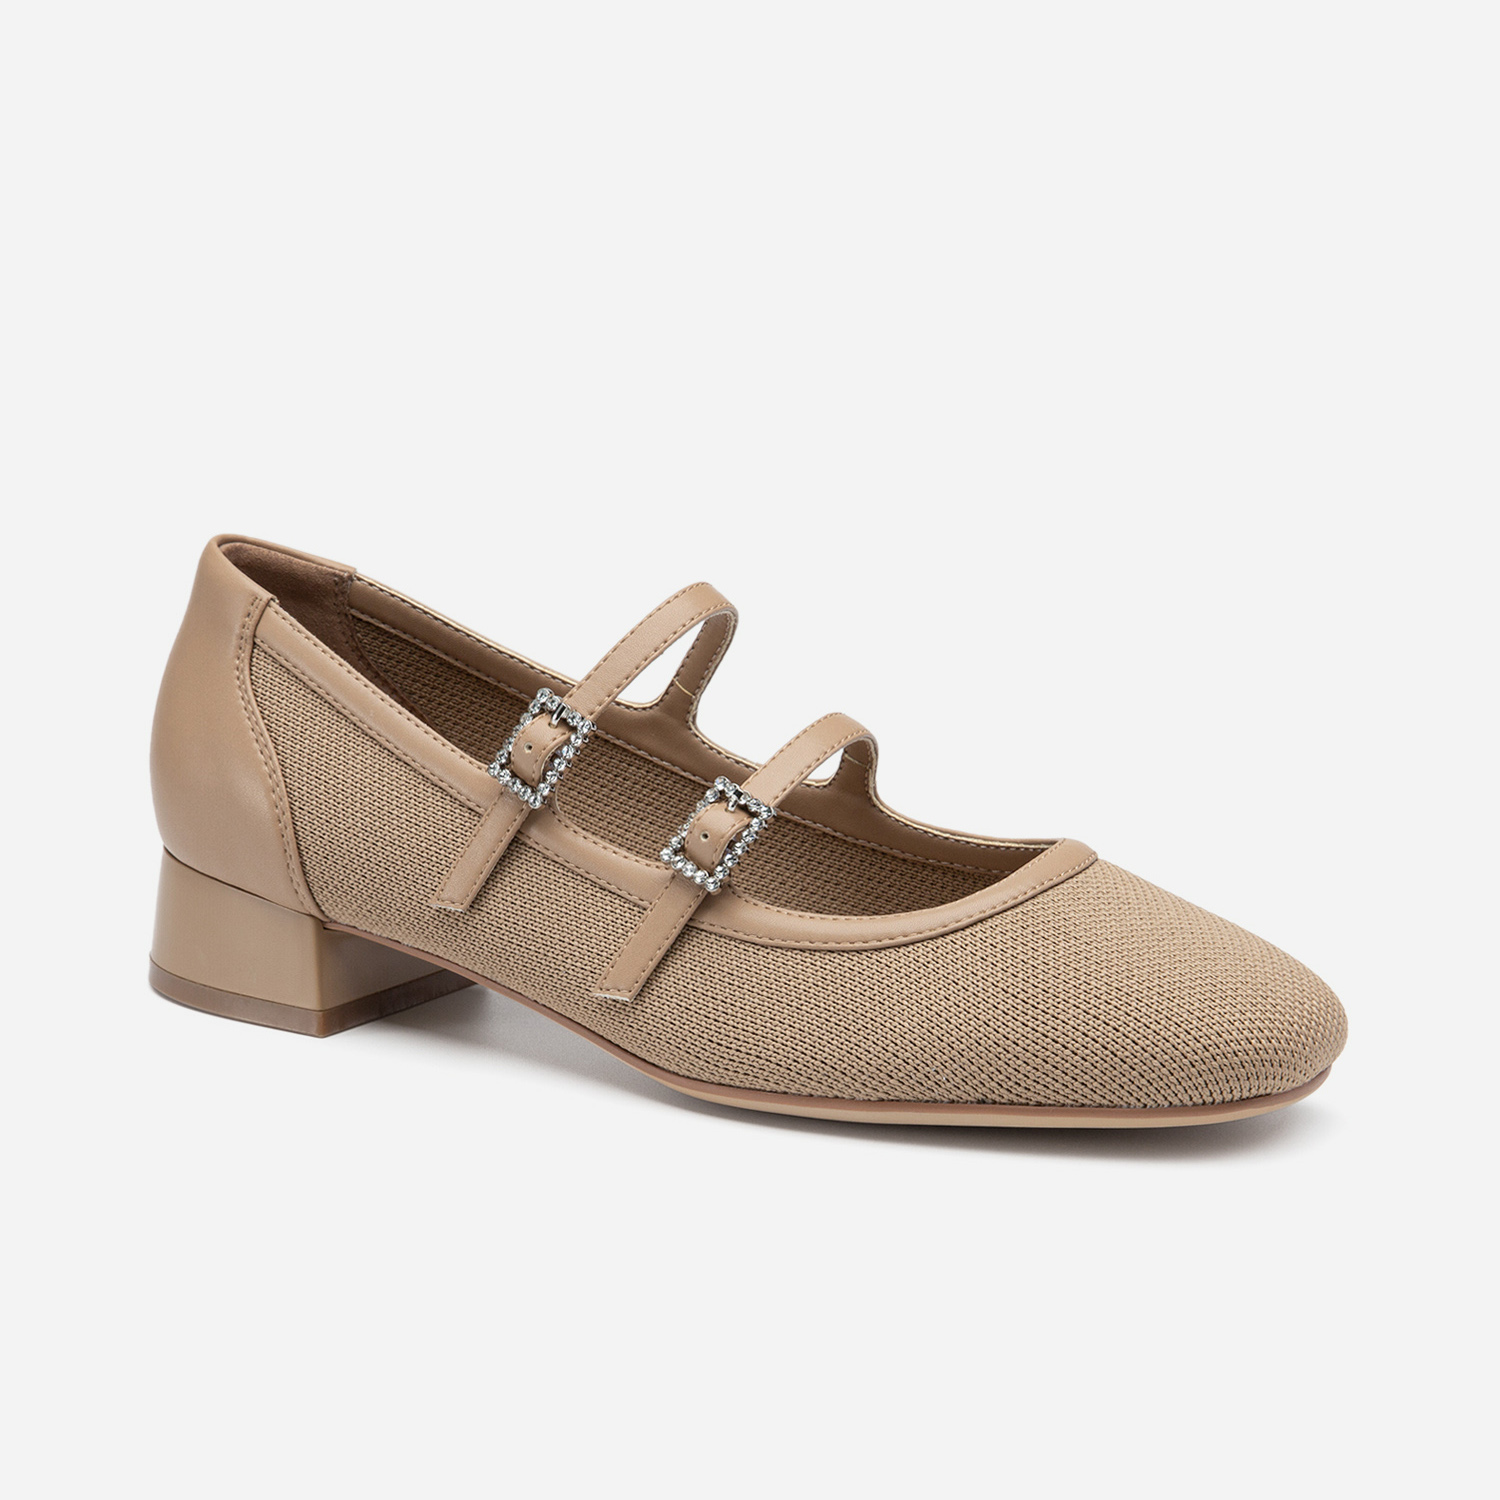 MOUSSE FIT Sweet Square Toe Flat Mary Janes